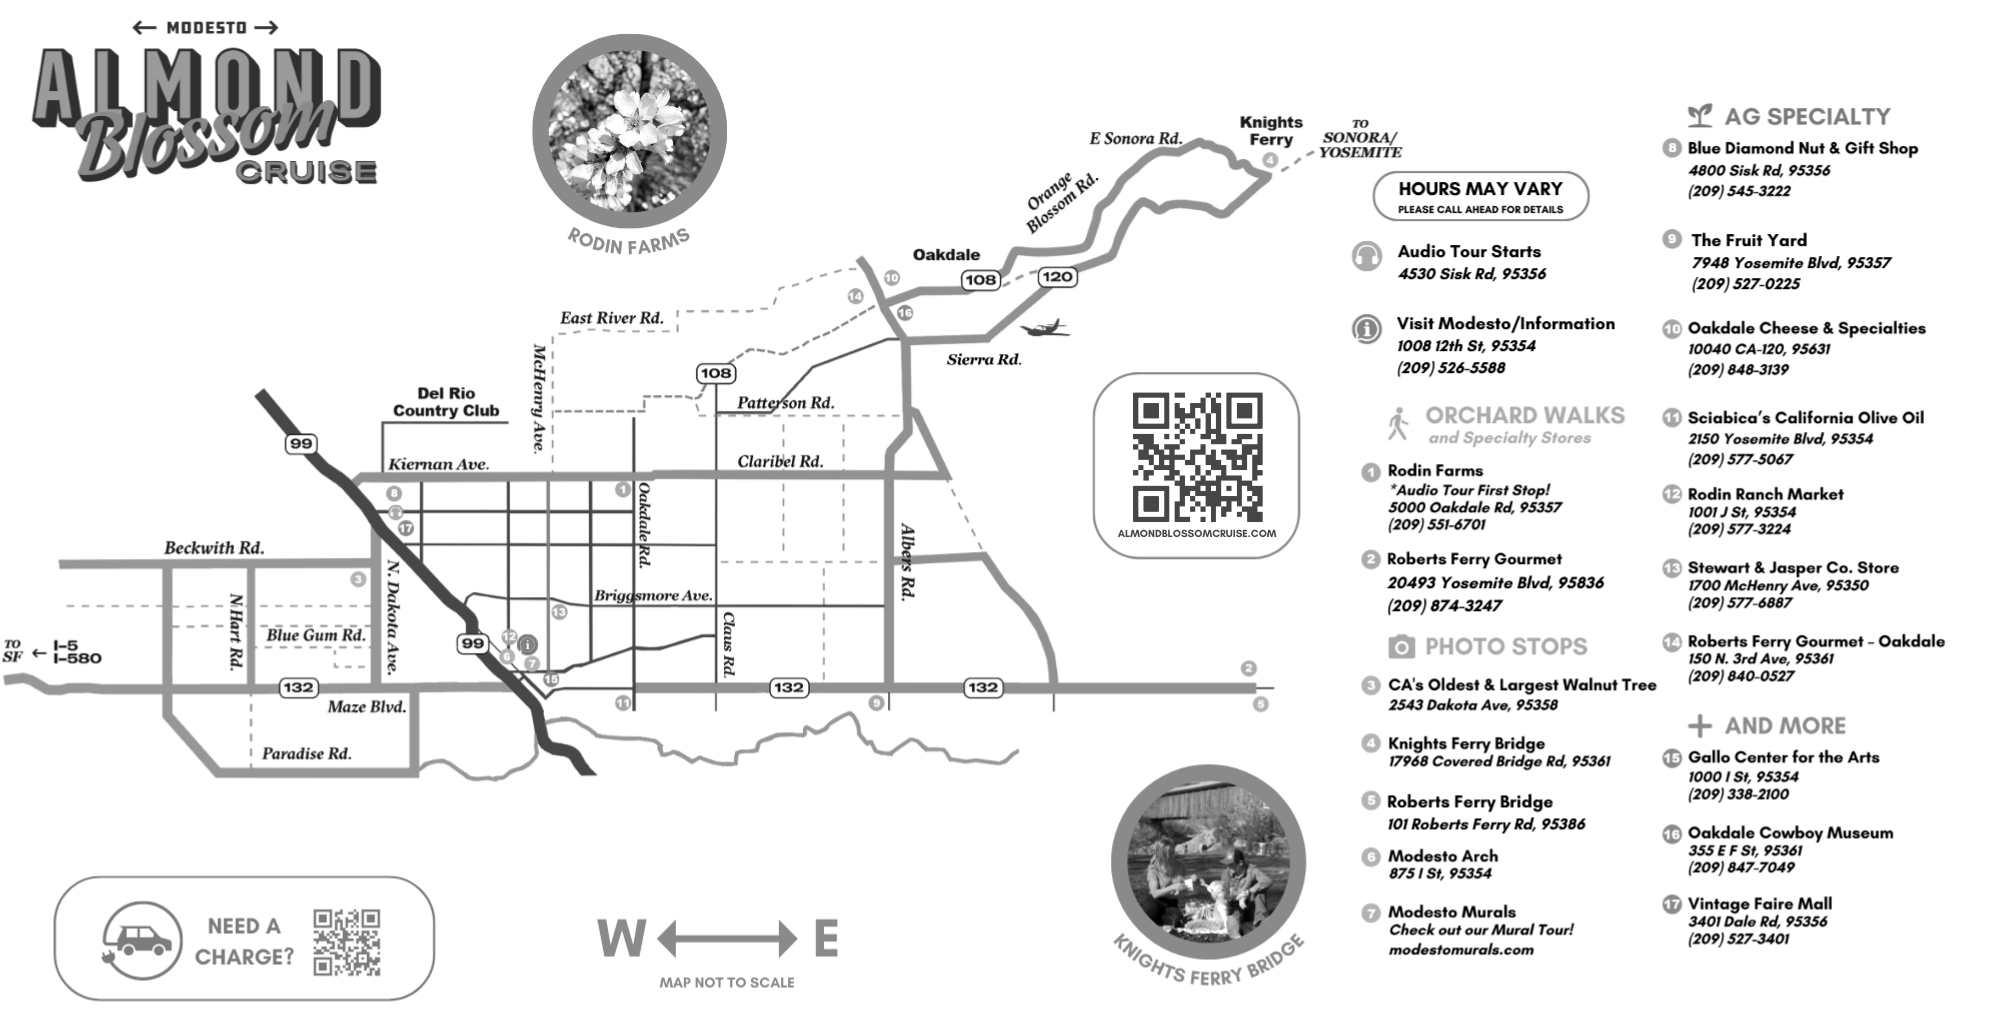 black and white version of almond blossom cruise map